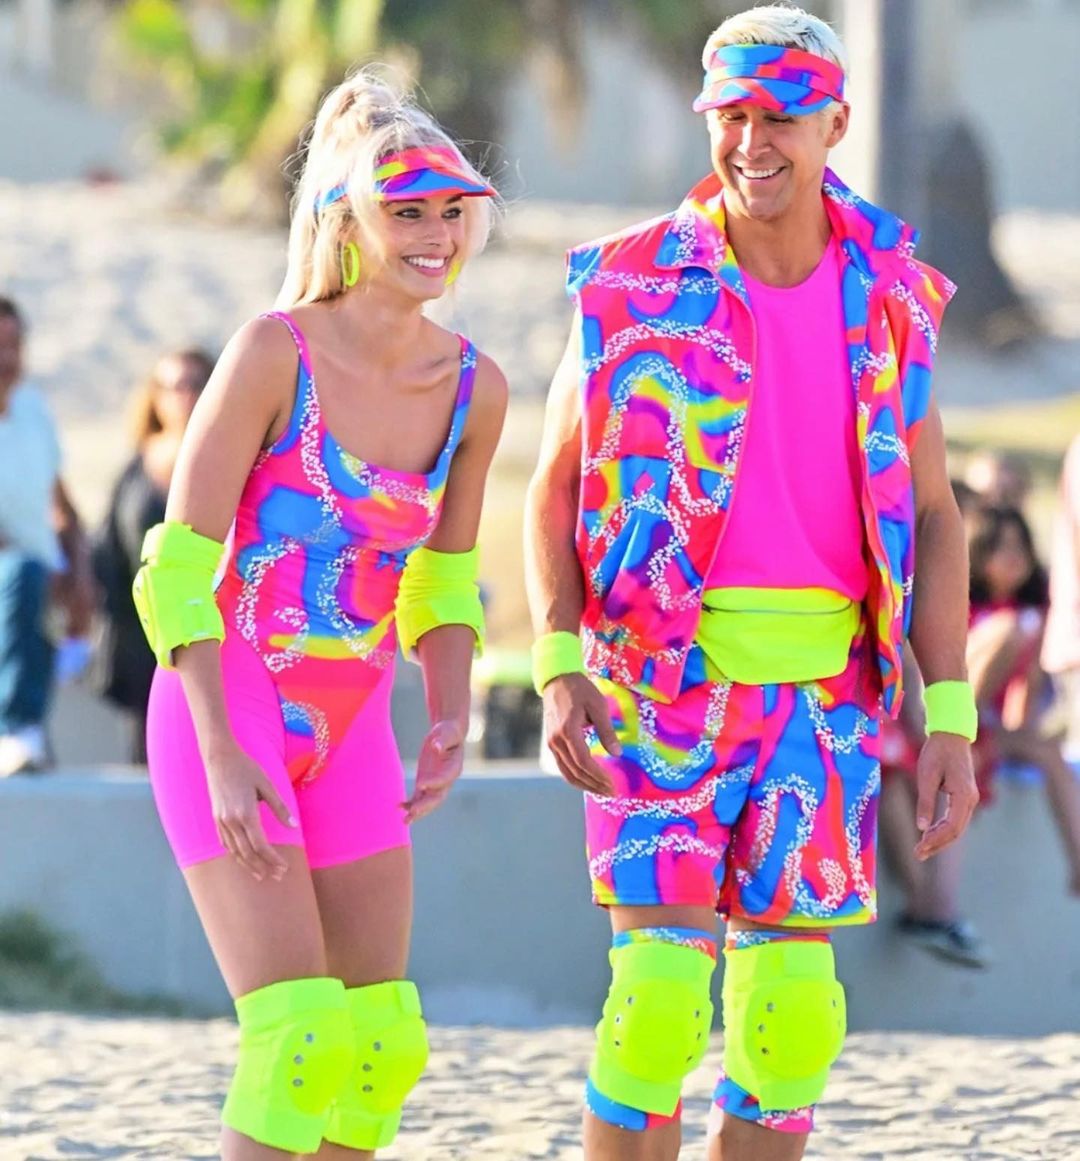 Photos n°1 : Gronk and Camille Kostek as Margot Robbie and Ryan Gosling’s Ken and Barbie!